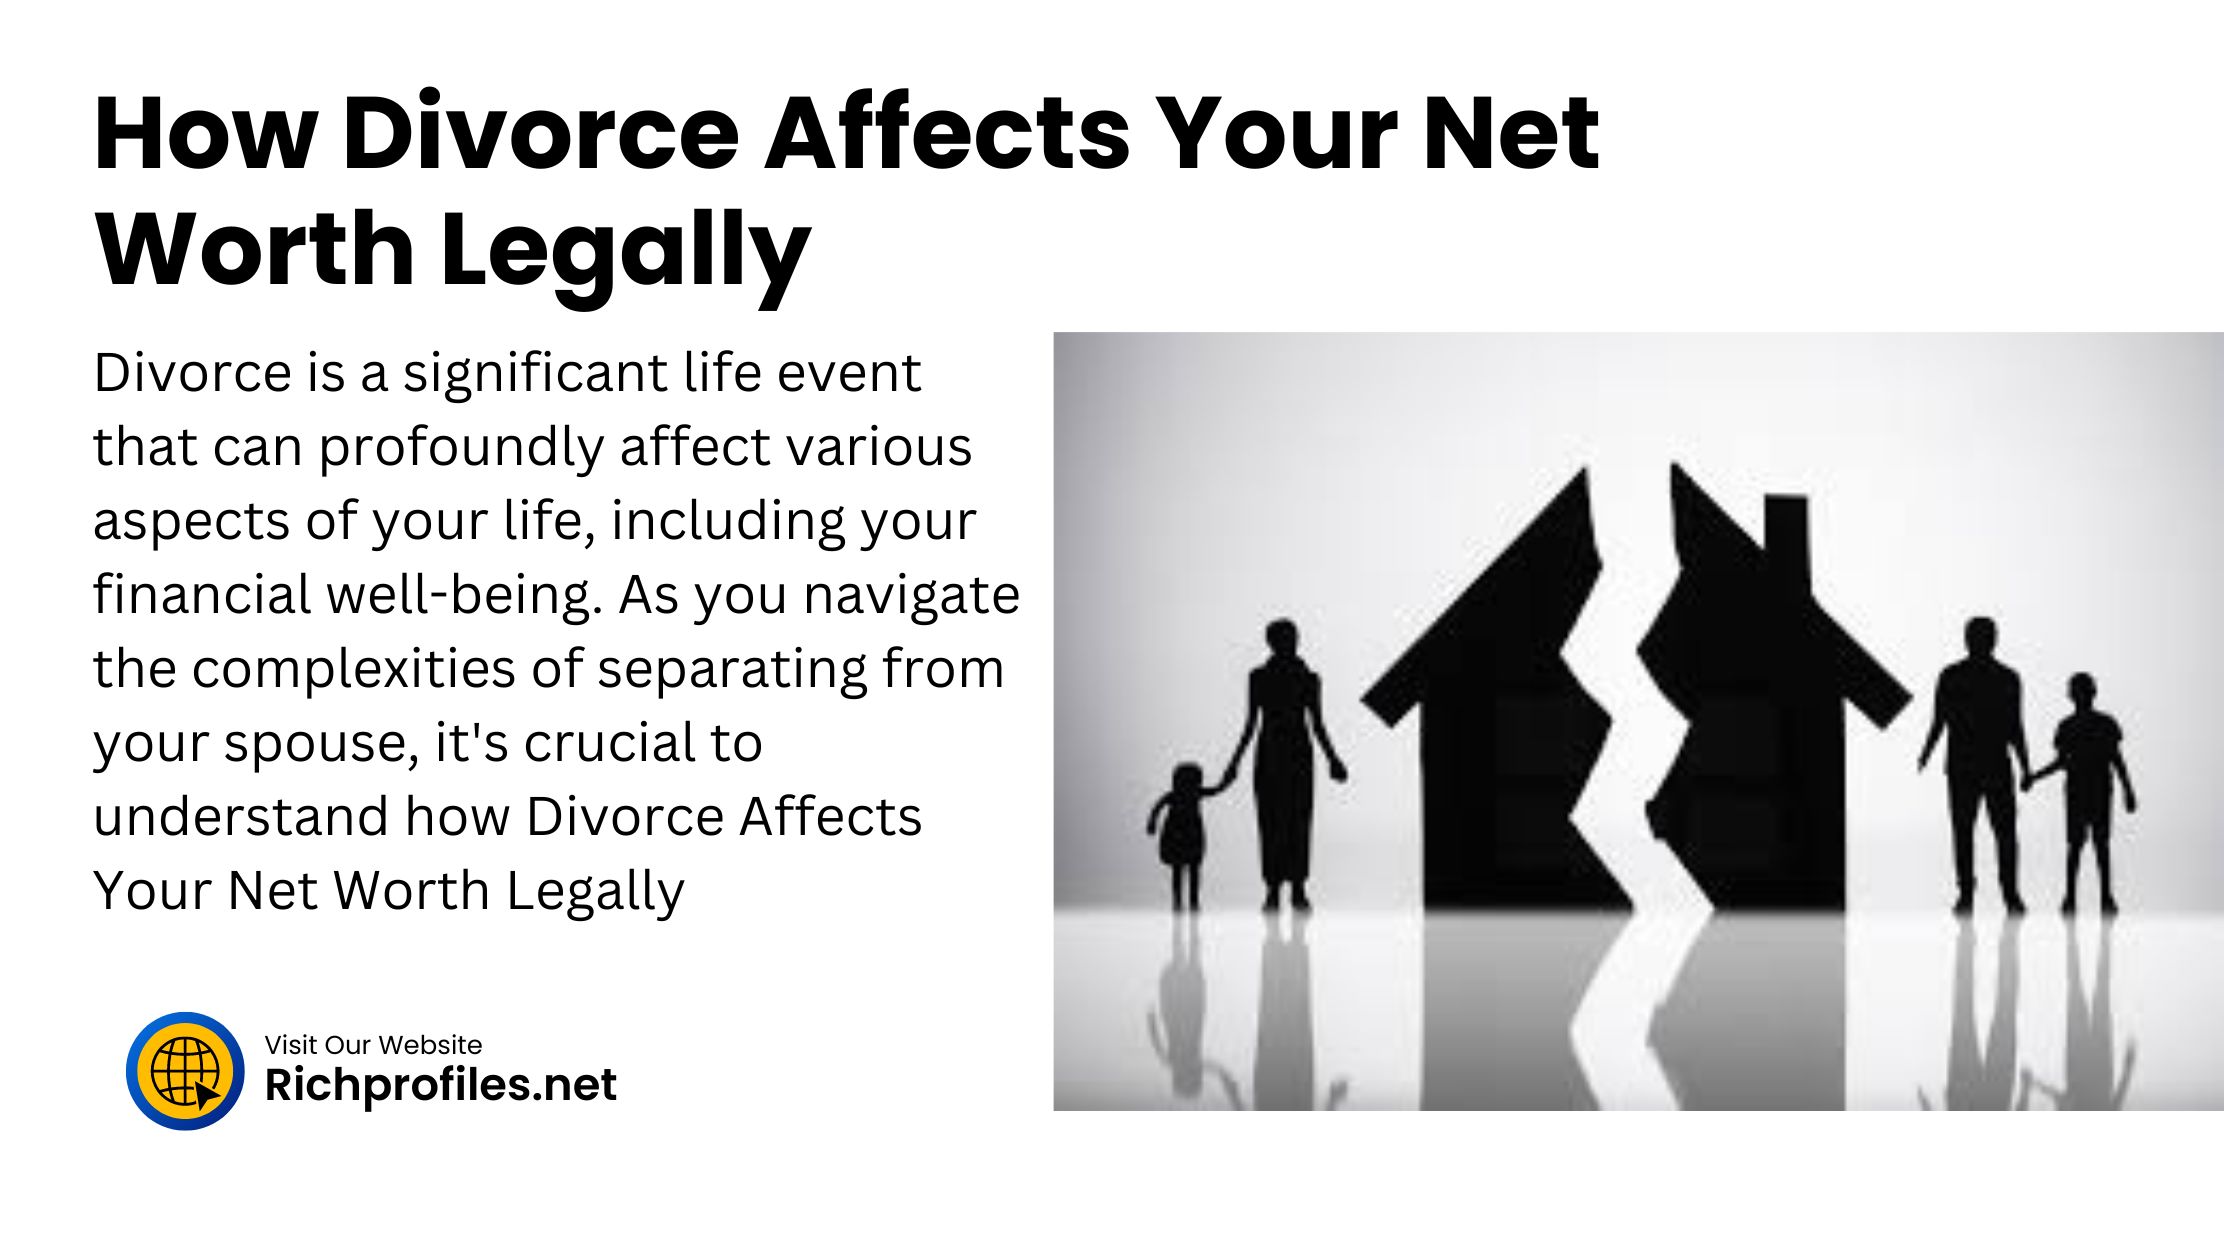 How Divorce Affects Your Net Worth Legally